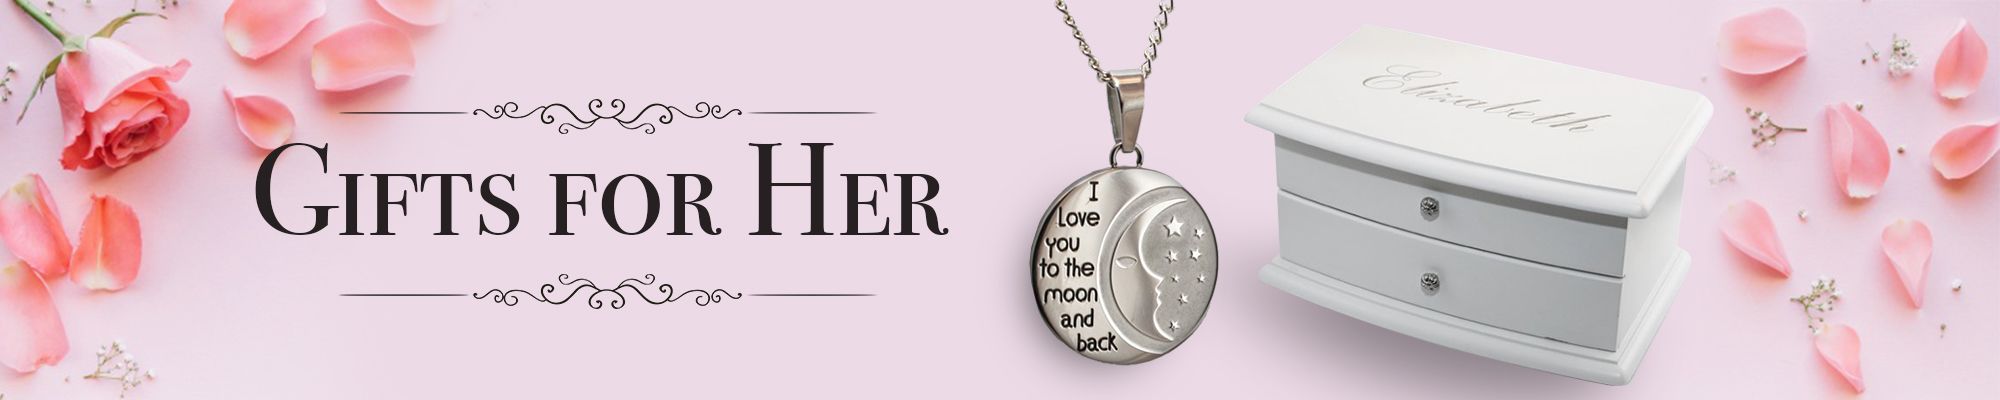 Custom Gifts for Her | Personalized Gifts for Women and Girls